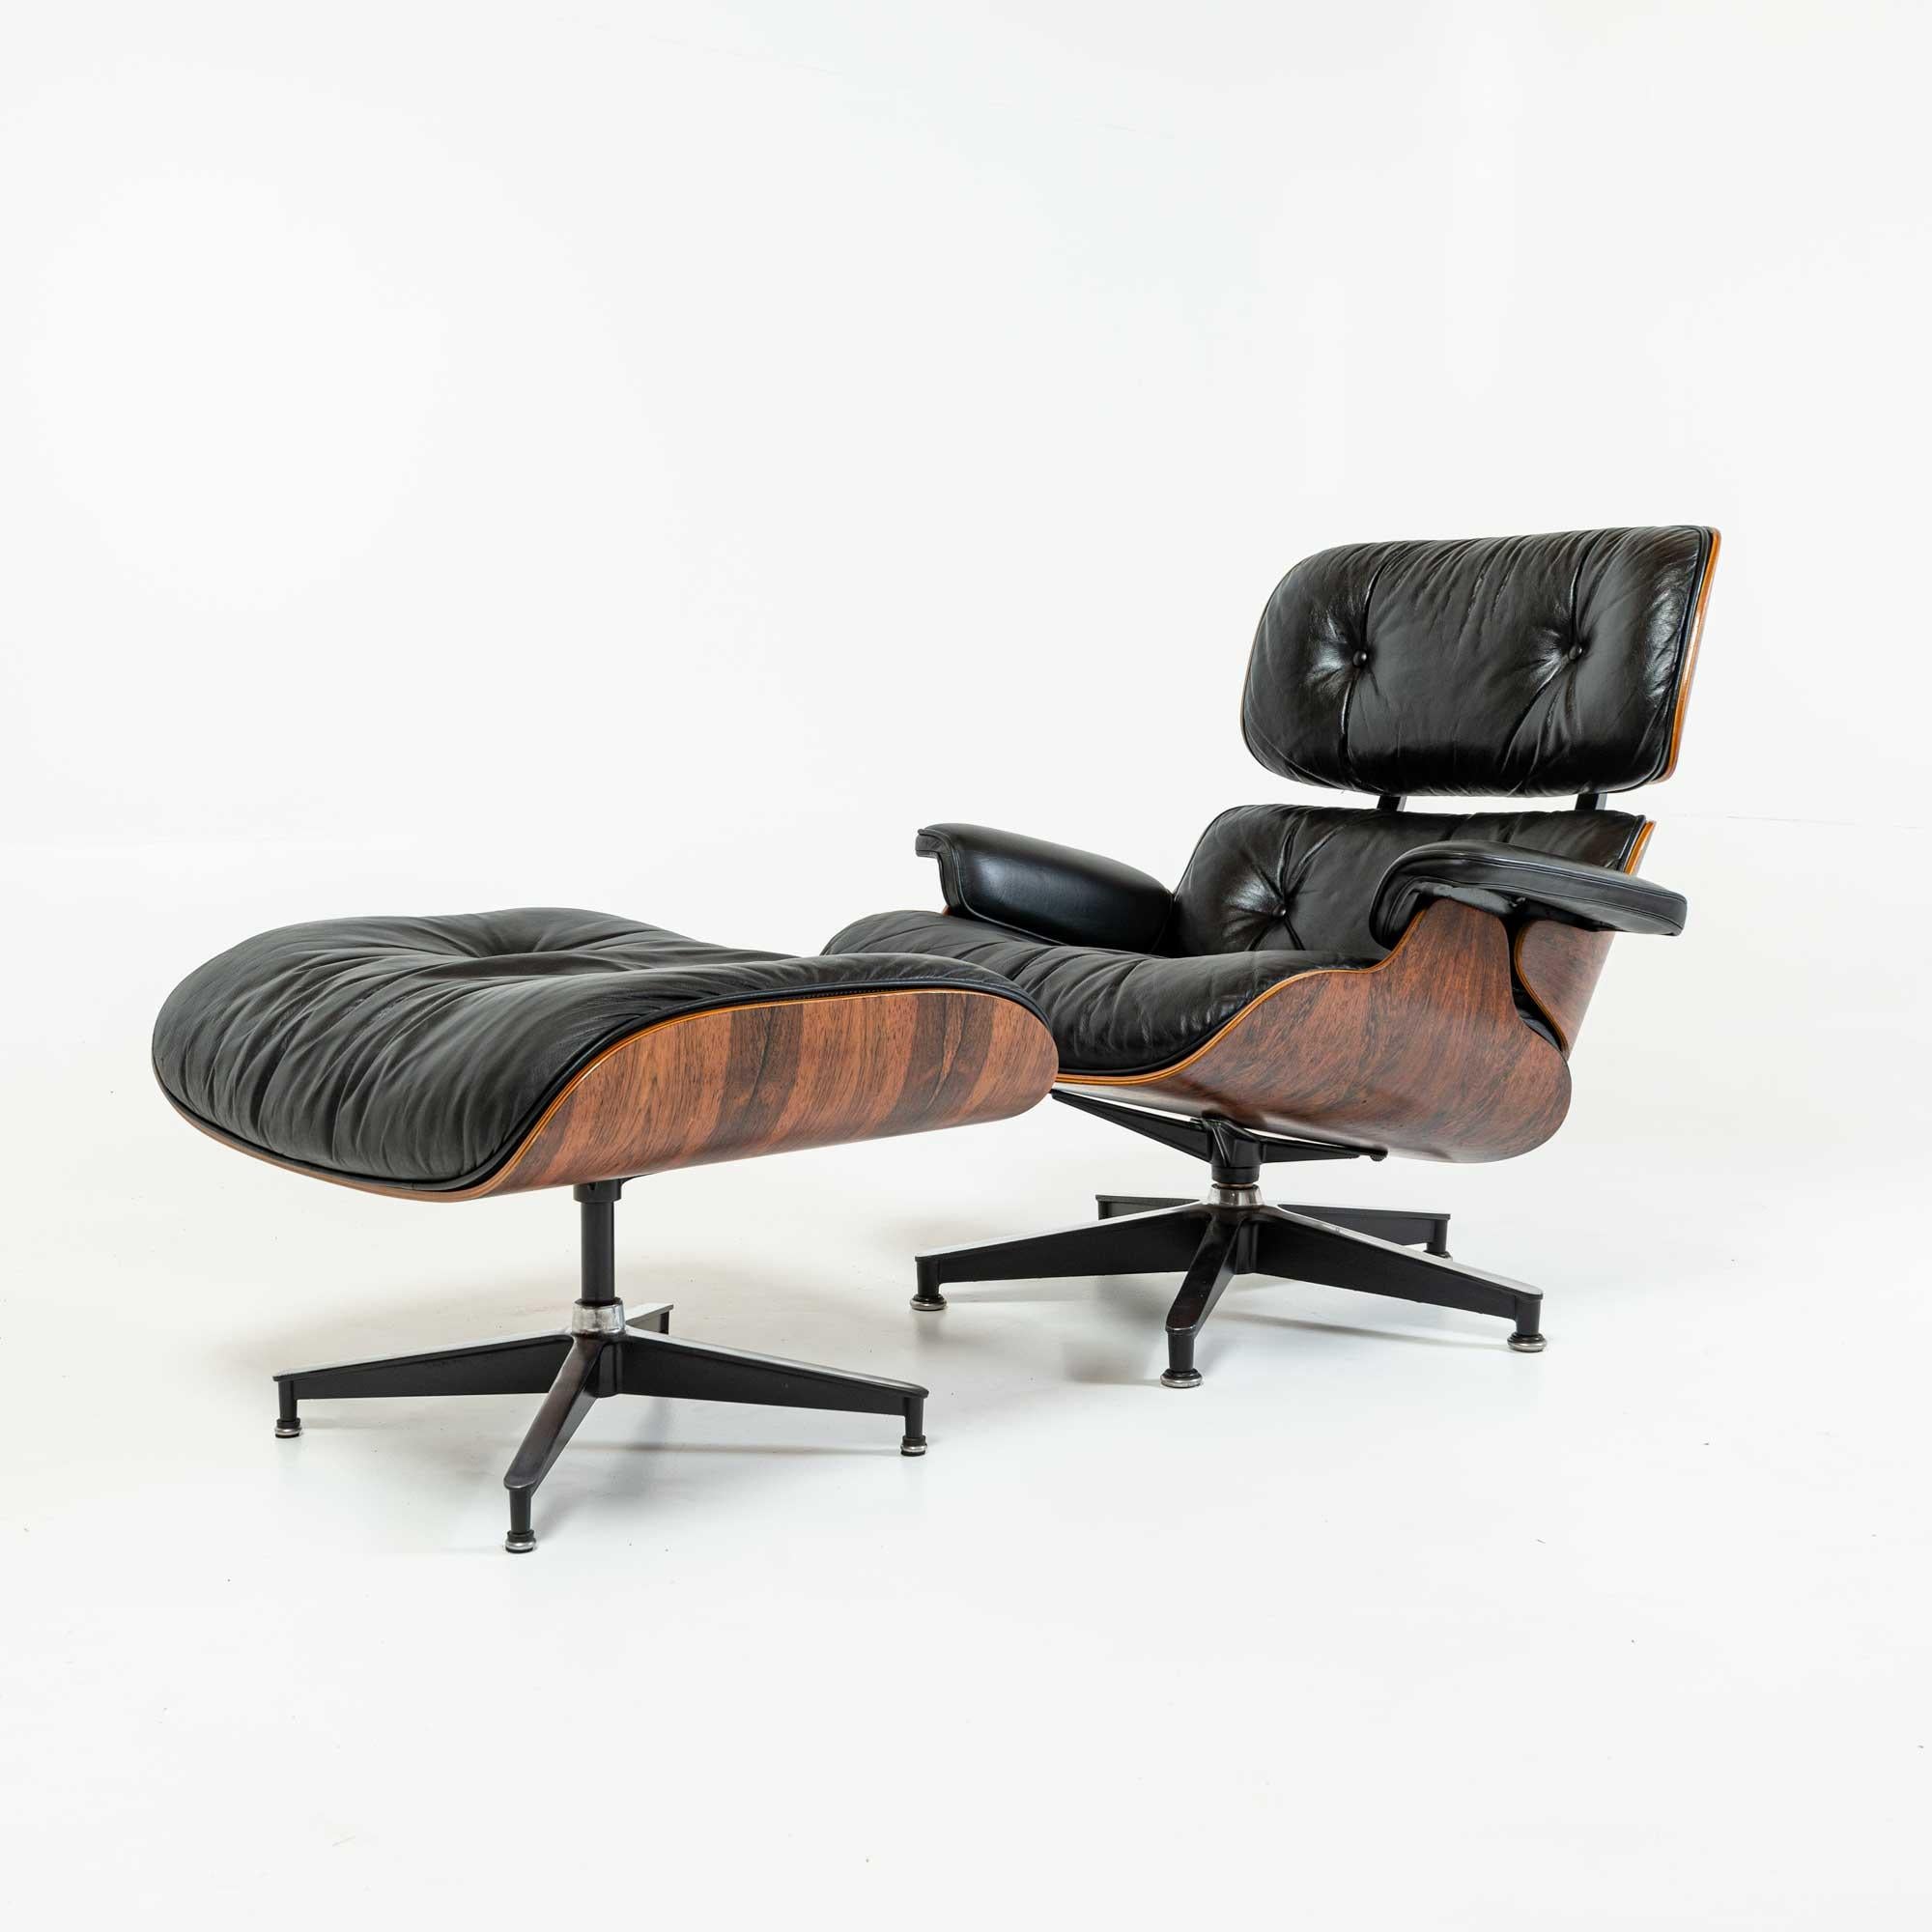 Mid-Century Modern Eames Lounge Chair and Ottoman 670/671 Third Gen Rosewood Restored Black Leather